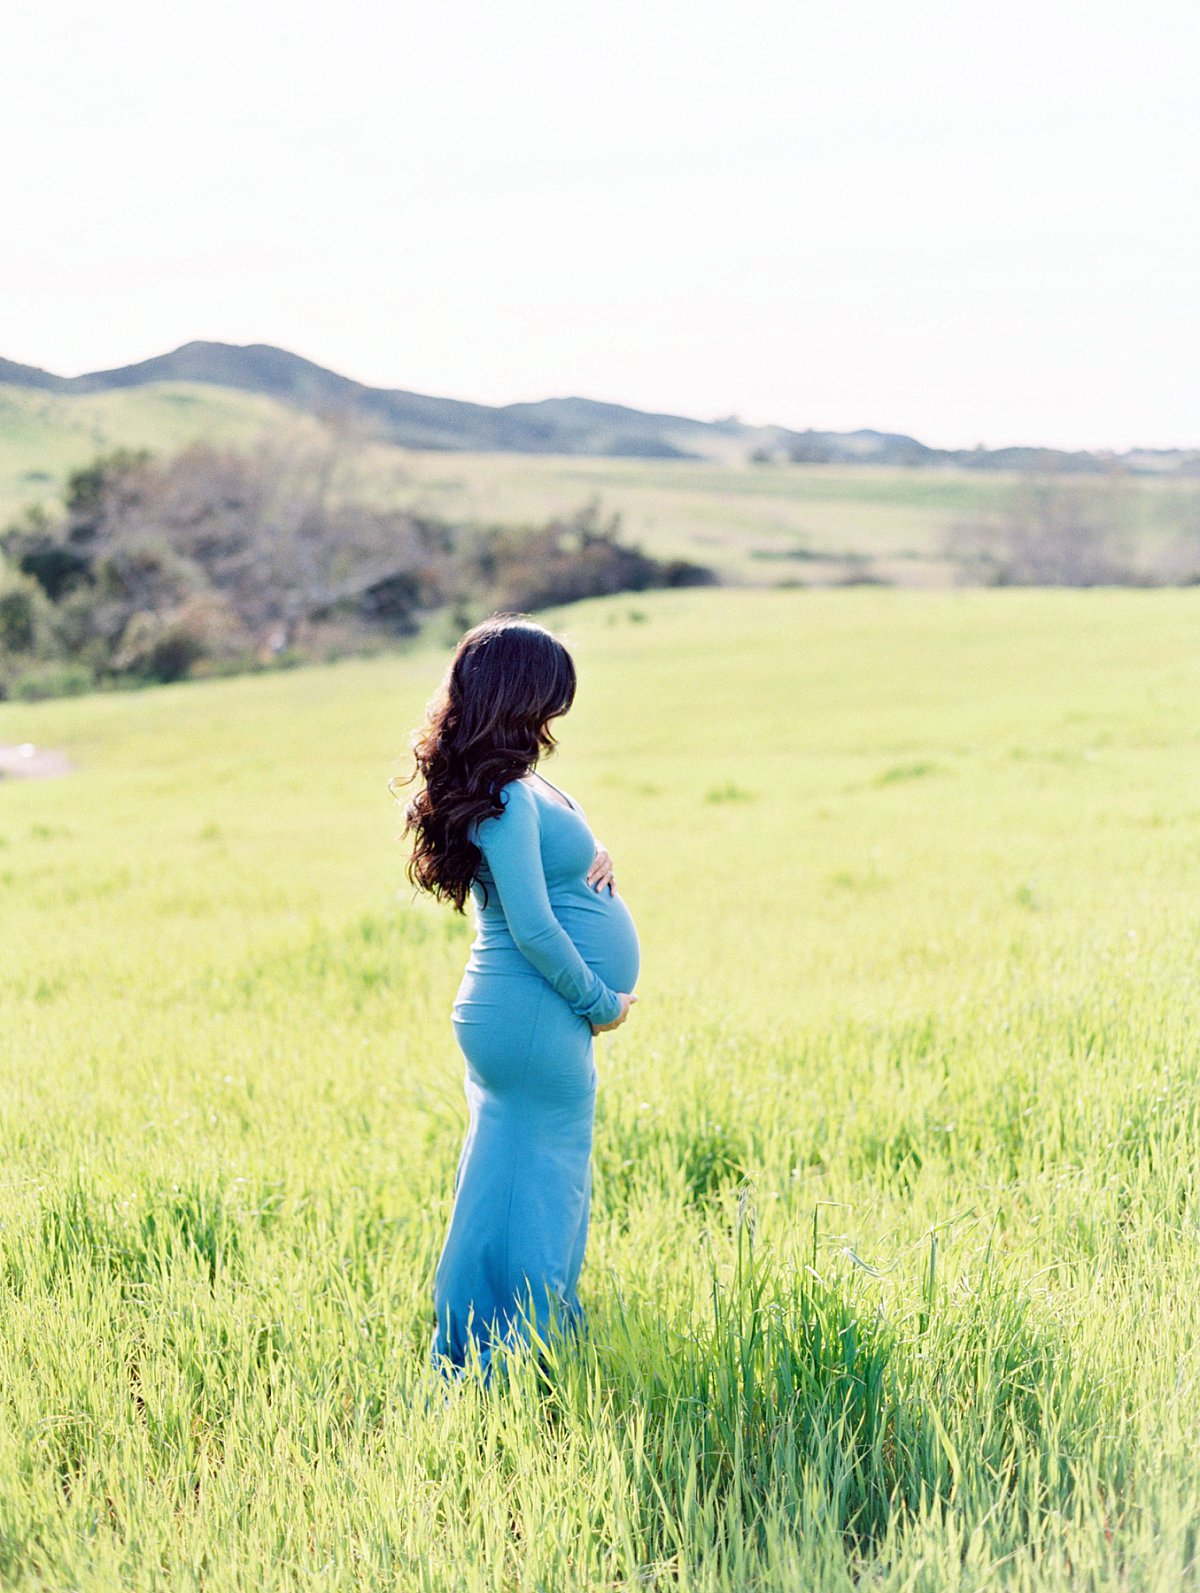 Thousand Oaks maternity photographer Daniele Rose captures an expectant mother wearing a blue dress in a field of green grass